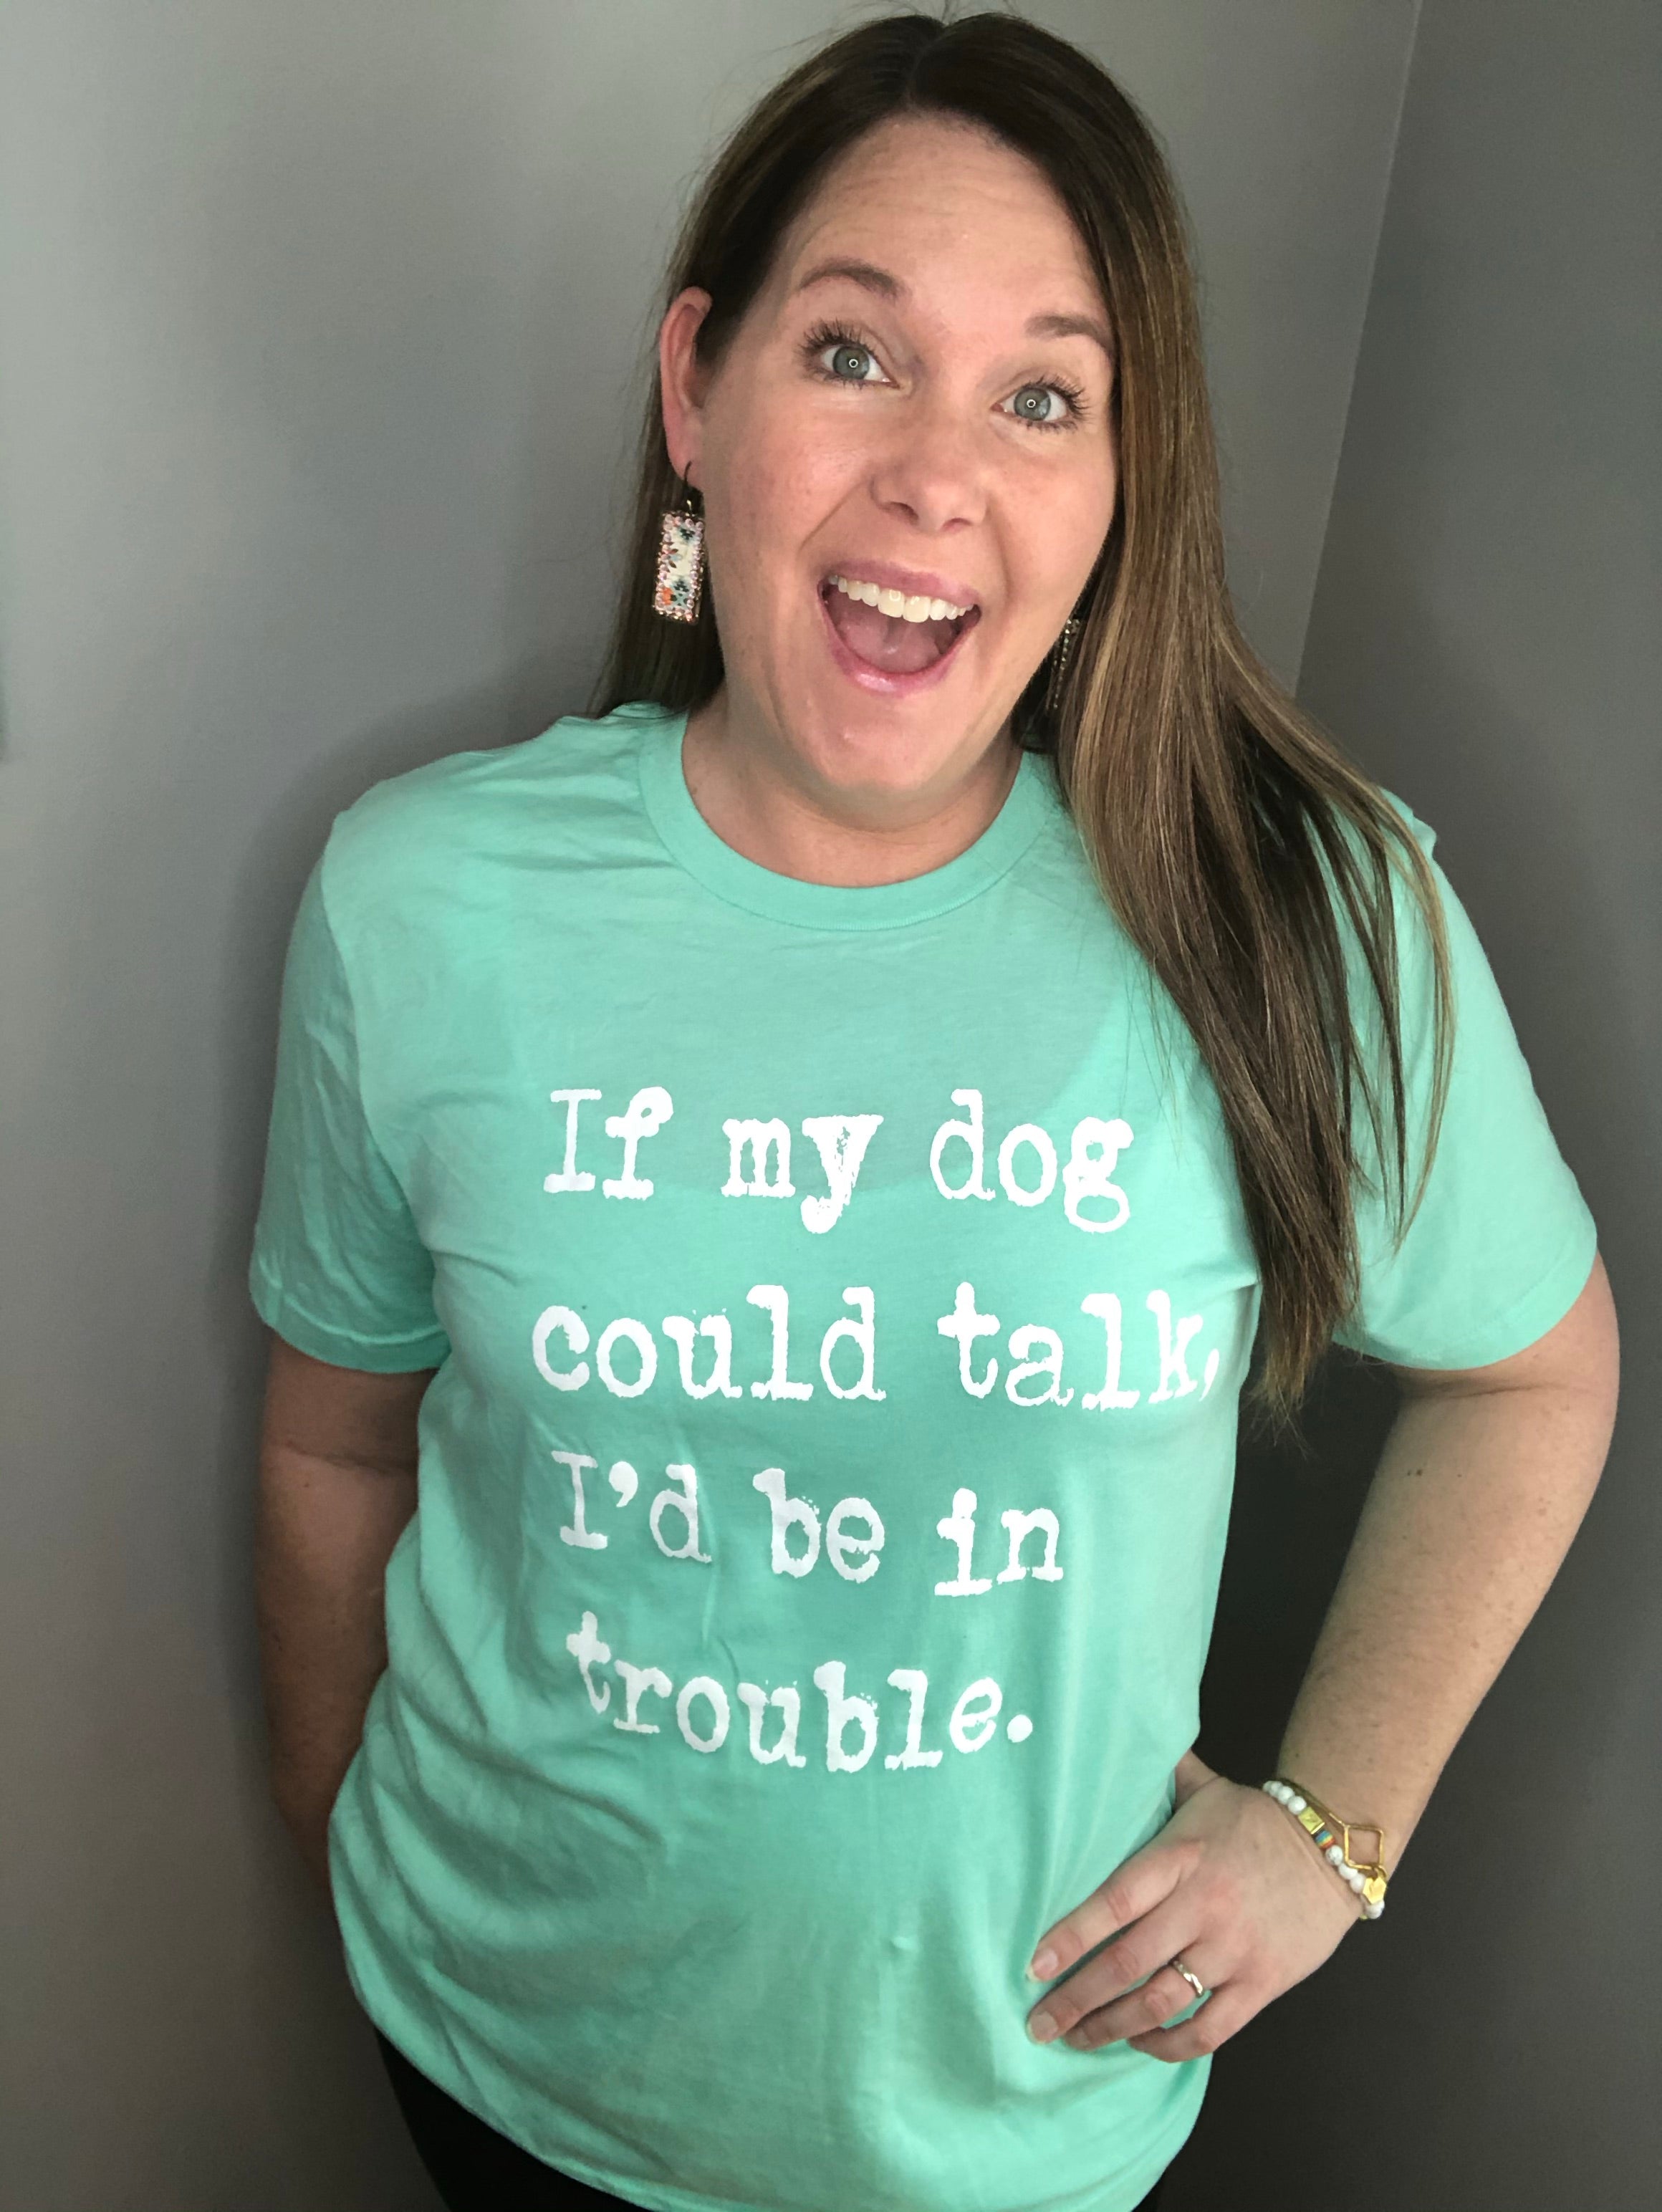 If my dog could talk I’d be in trouble tee